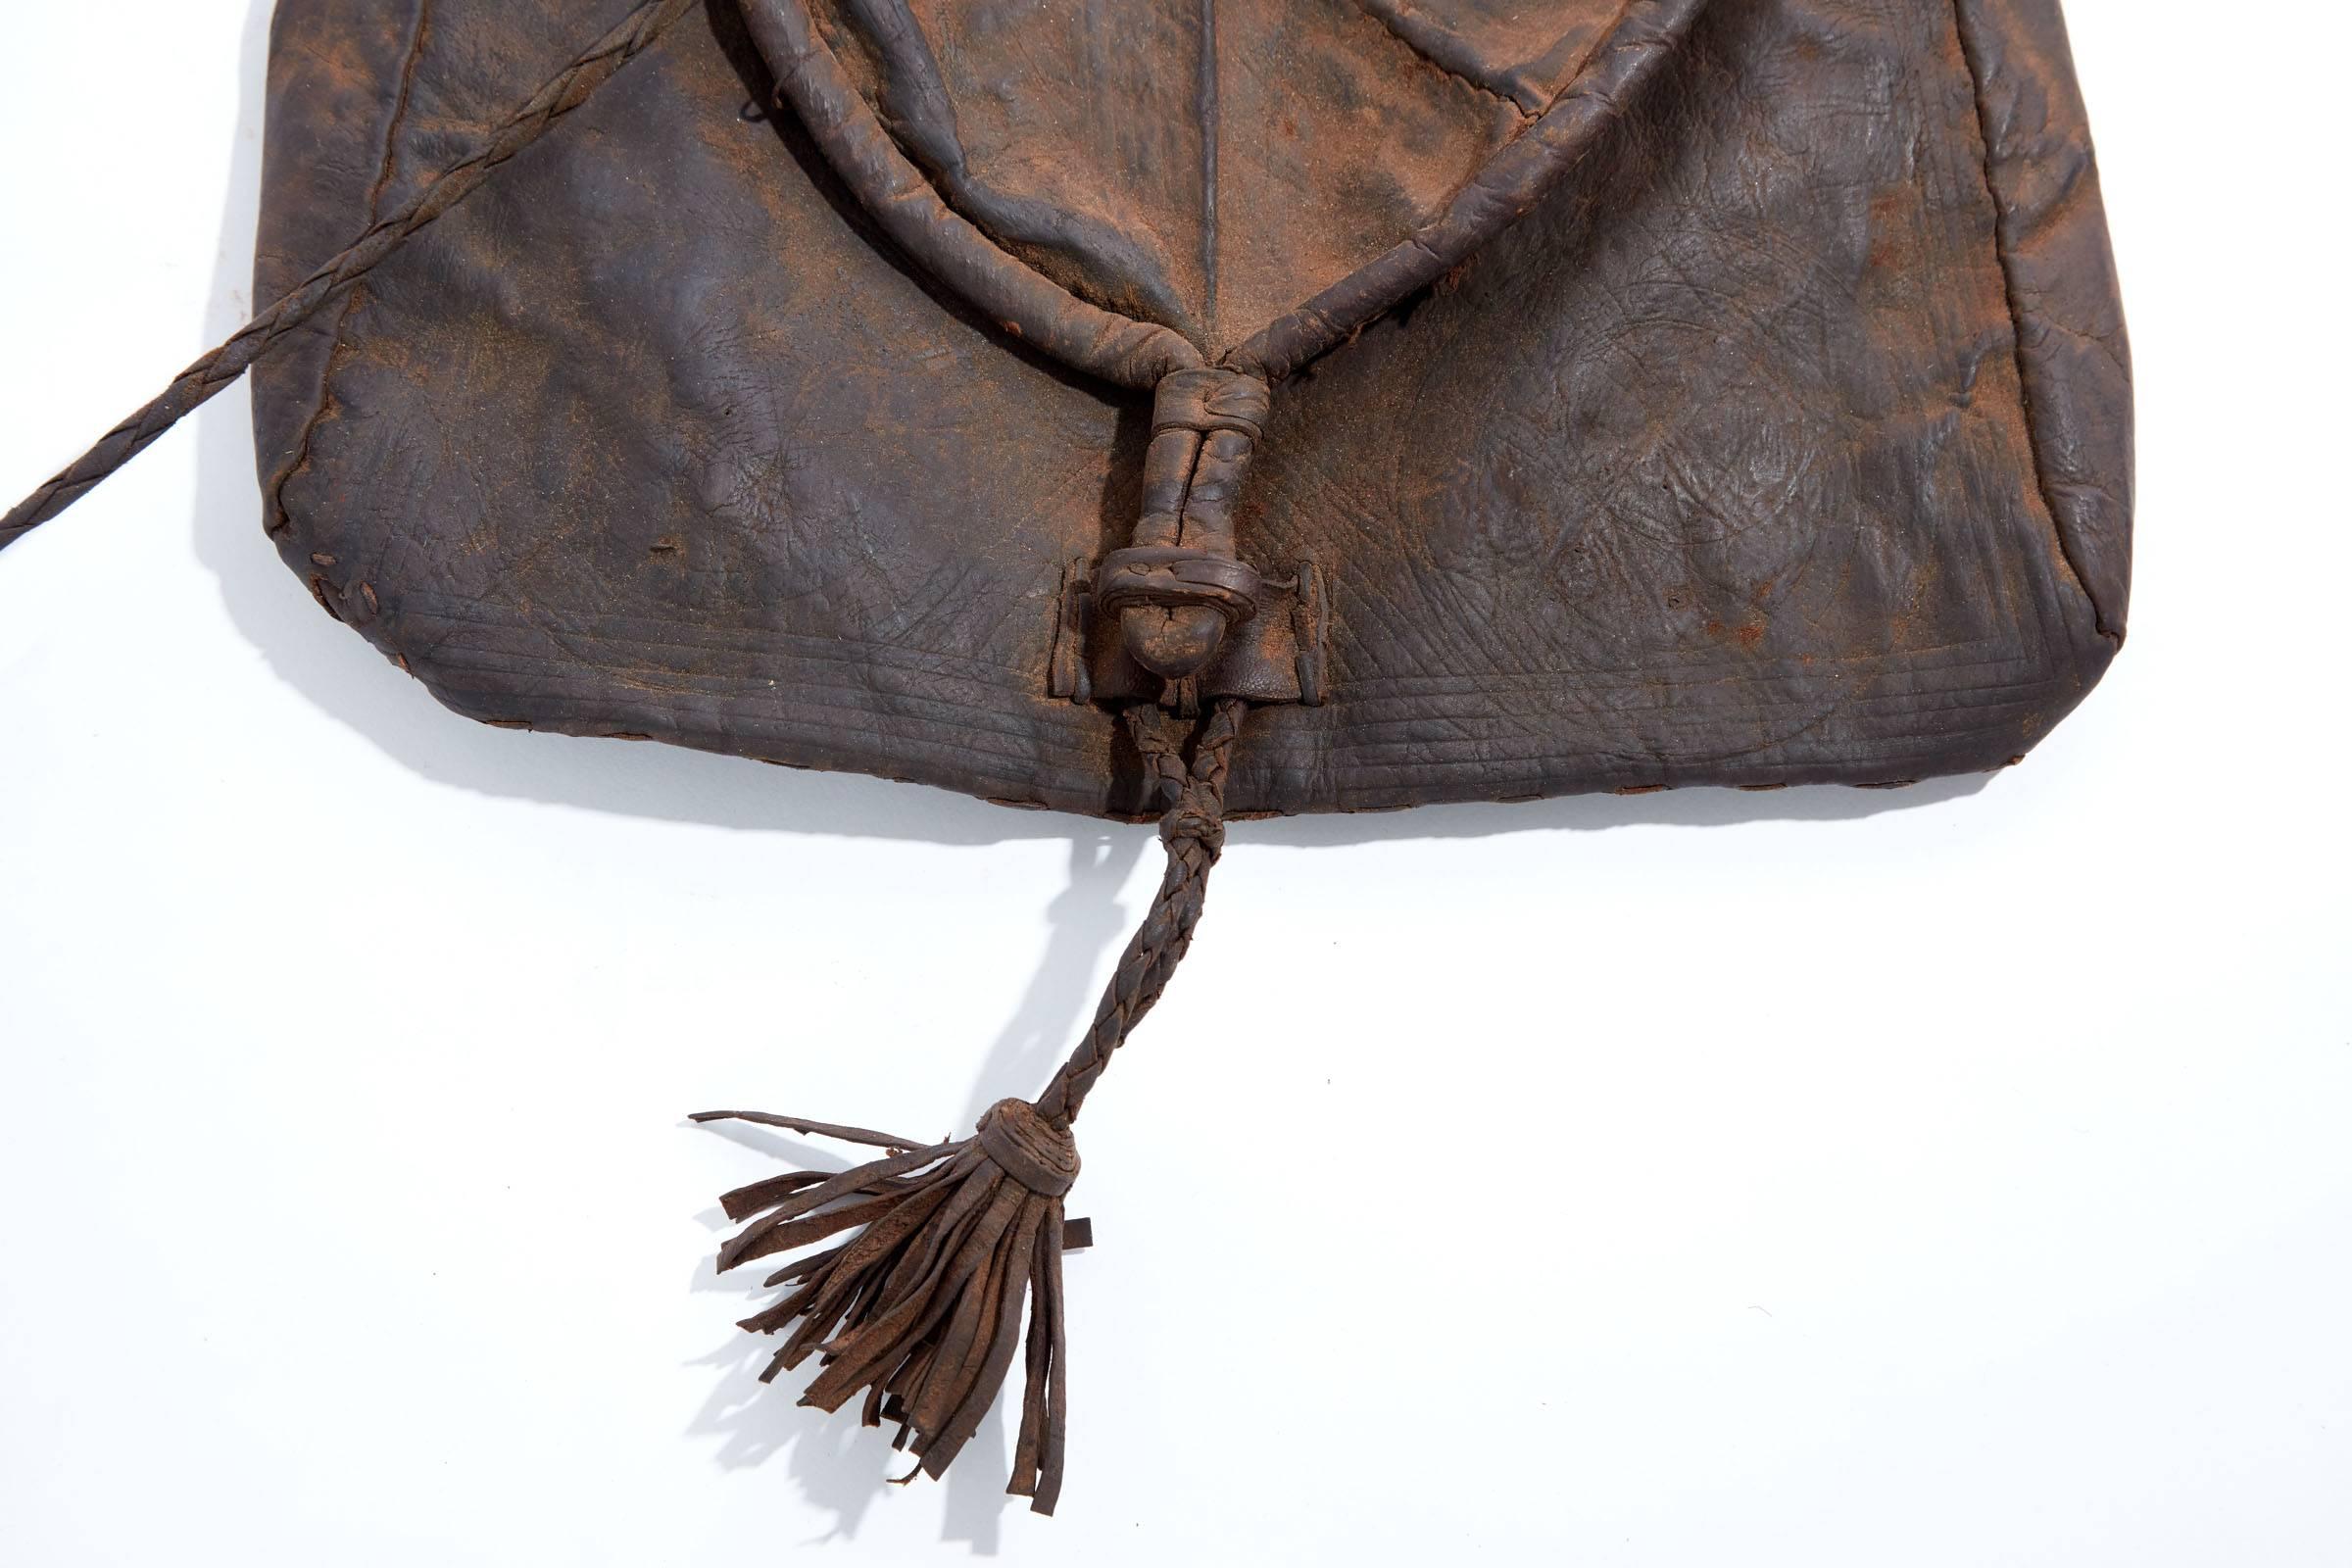 Early 20th century leather Afghani bag.